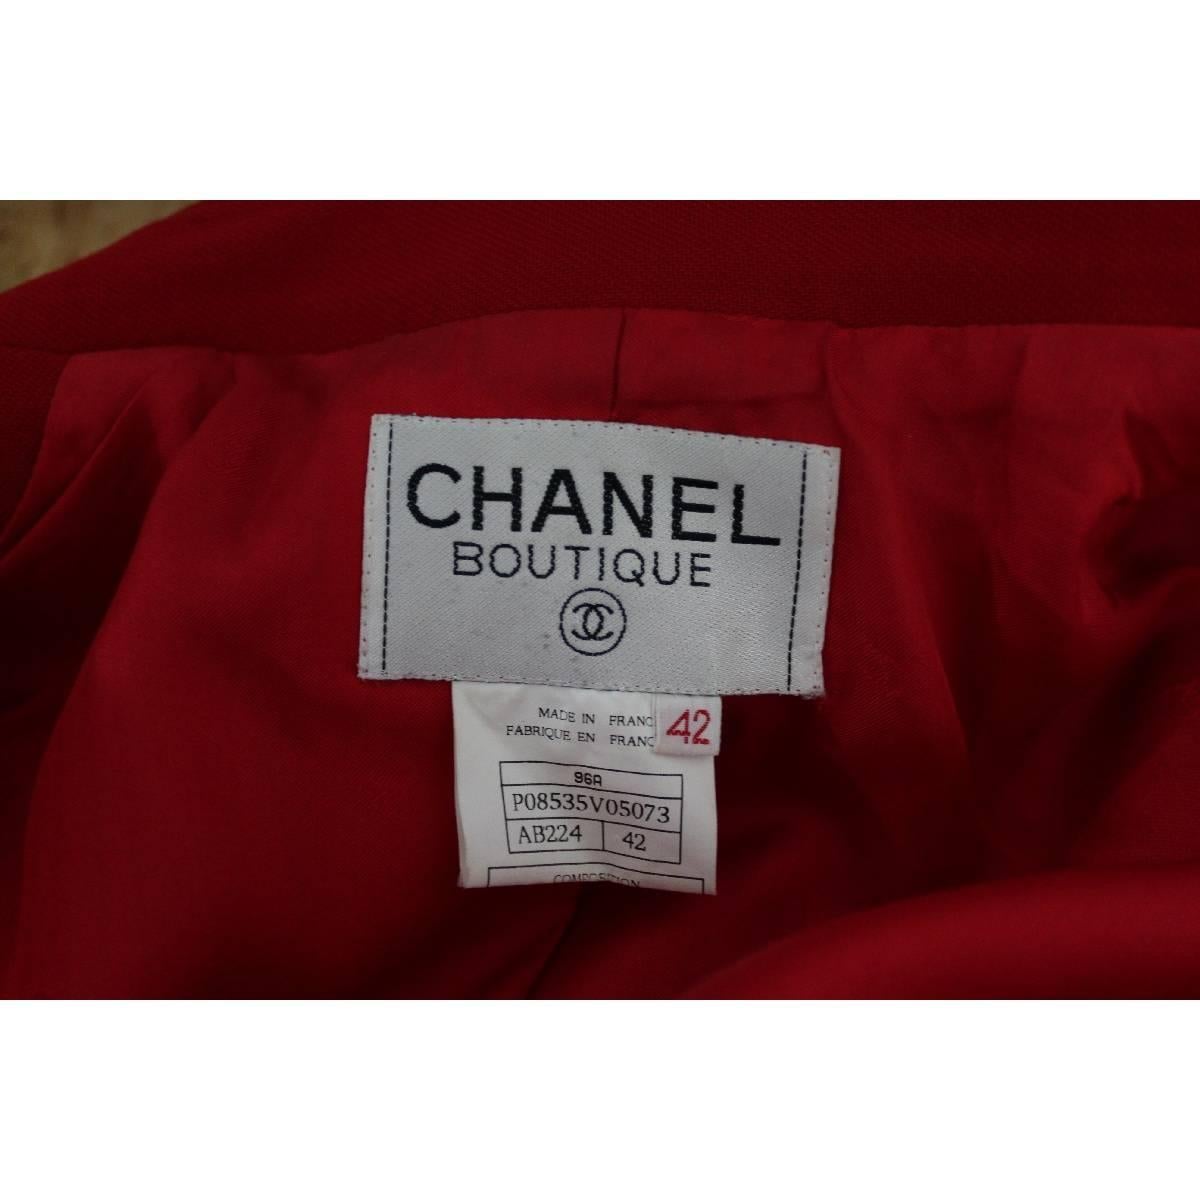 Chanel Boutique vintage wool red jacket button jewel size 42 made france 1980s 2